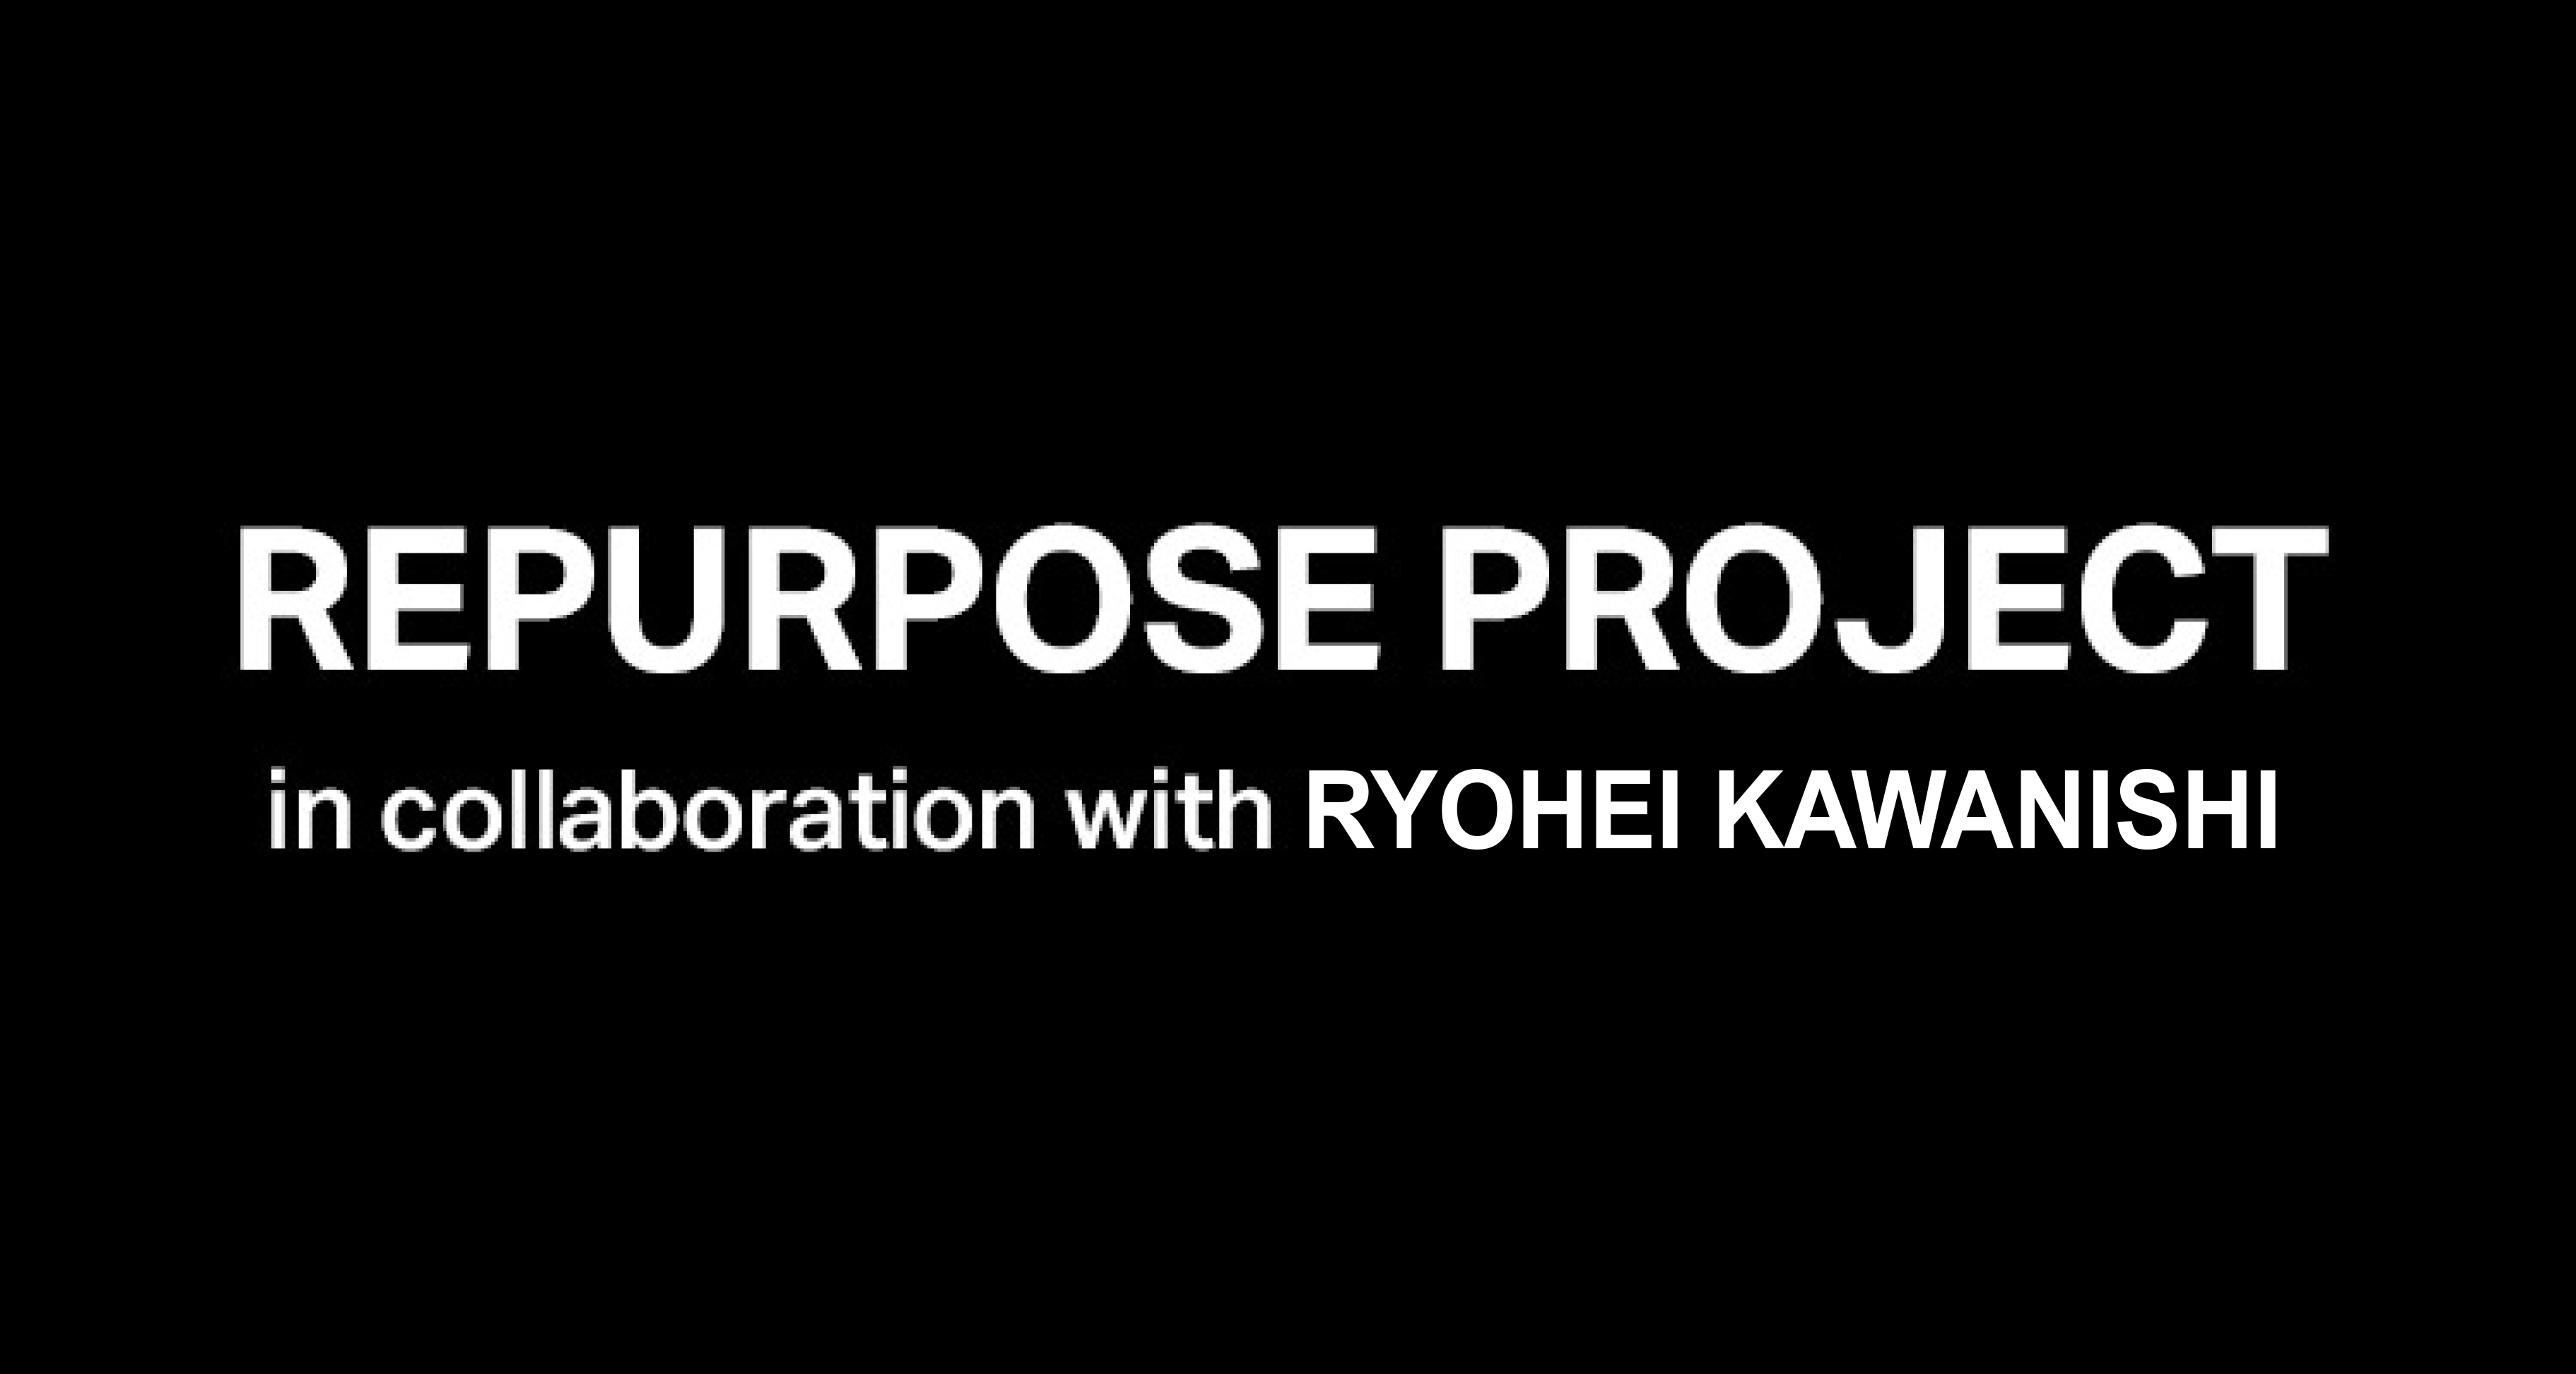 REPURPOSE PROJECT - Collaborate with R.K -